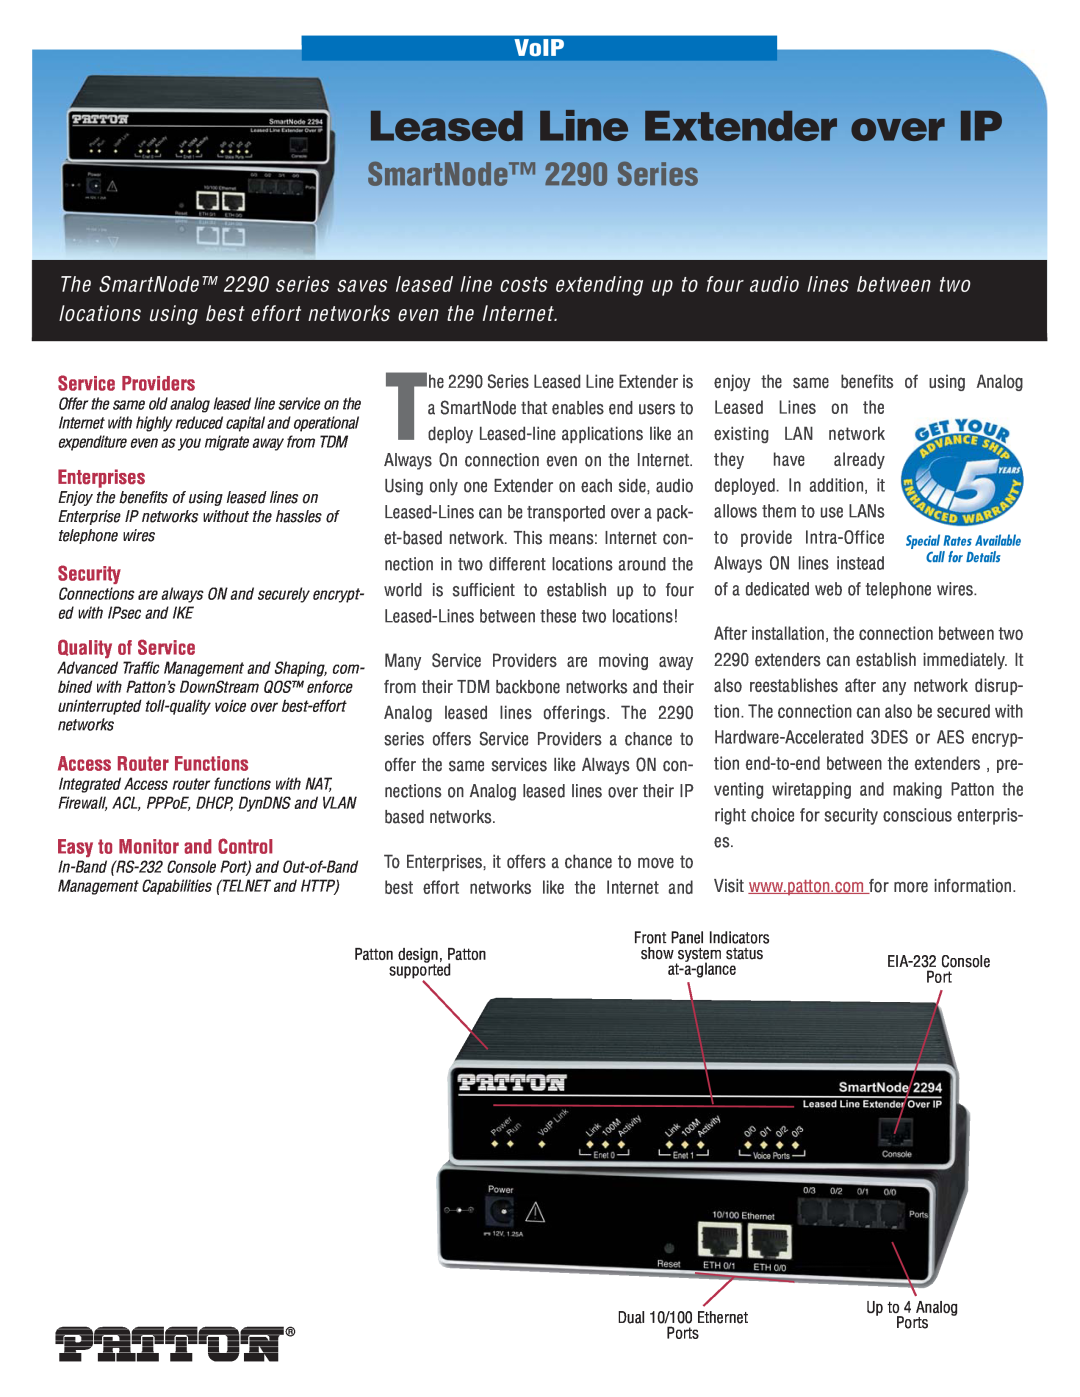 Patton electronic manual Leased Line Extender over IP, SmartNode 2290 Series, VoIP, Service Providers, Enterprises 